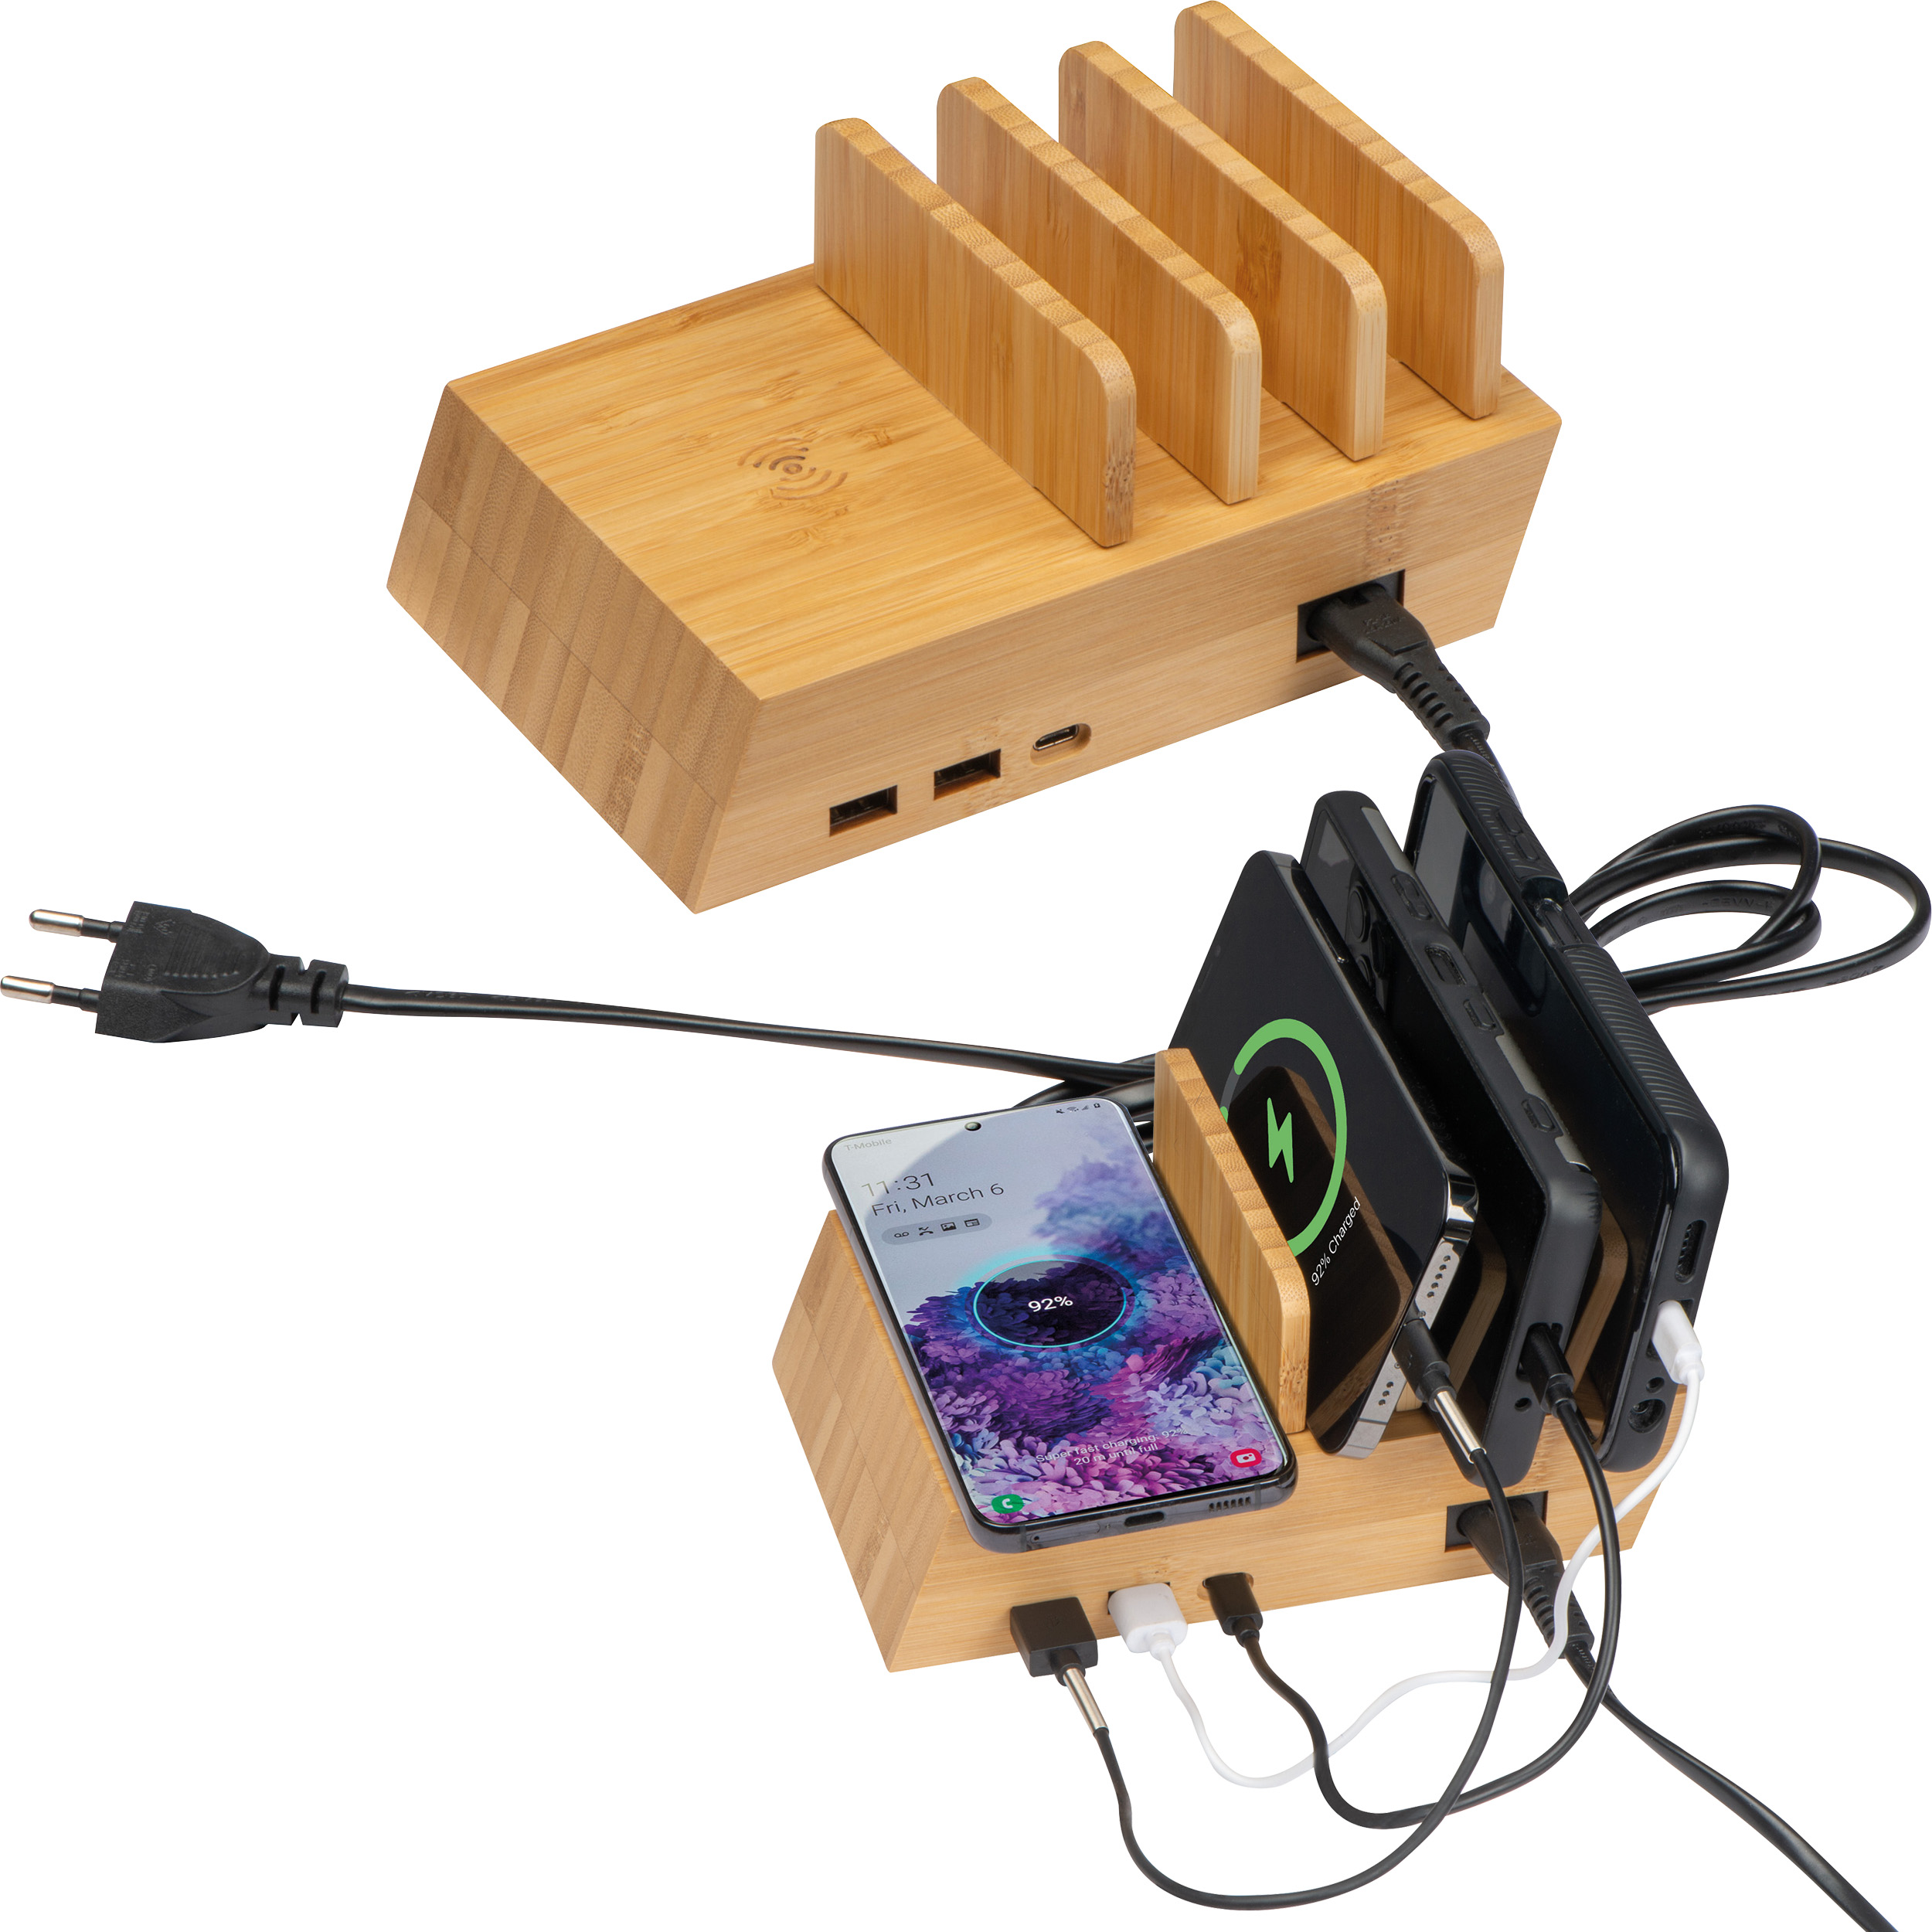 Charging station for 4 devices